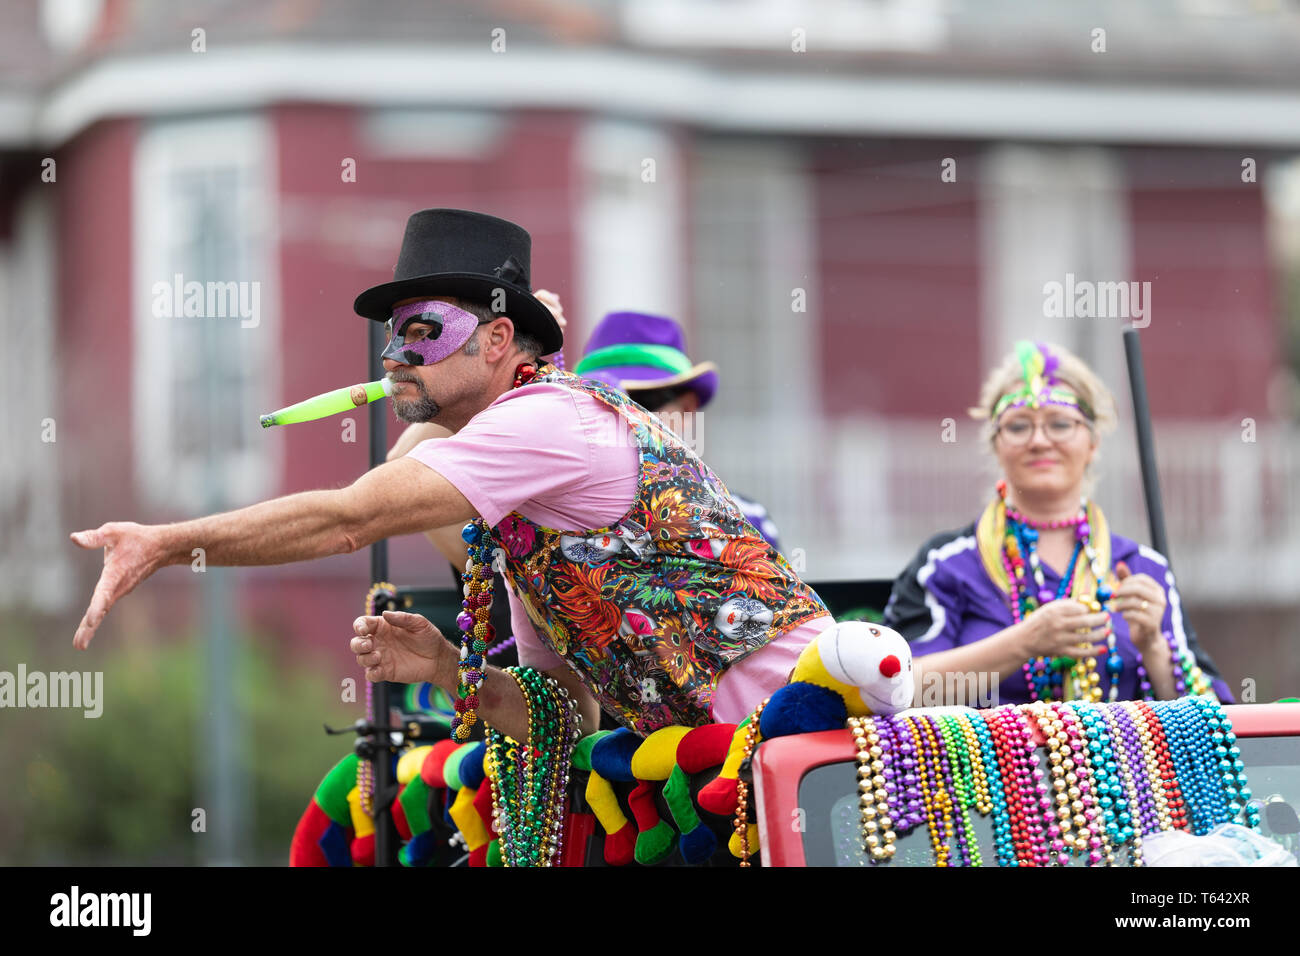 New Orleans, Louisiana, USA - February 23, 2019: Mardi Gras Parade, Man  wearing traditional clothing, throwing beads to the spectators during the  mard Stock Photo - Alamy